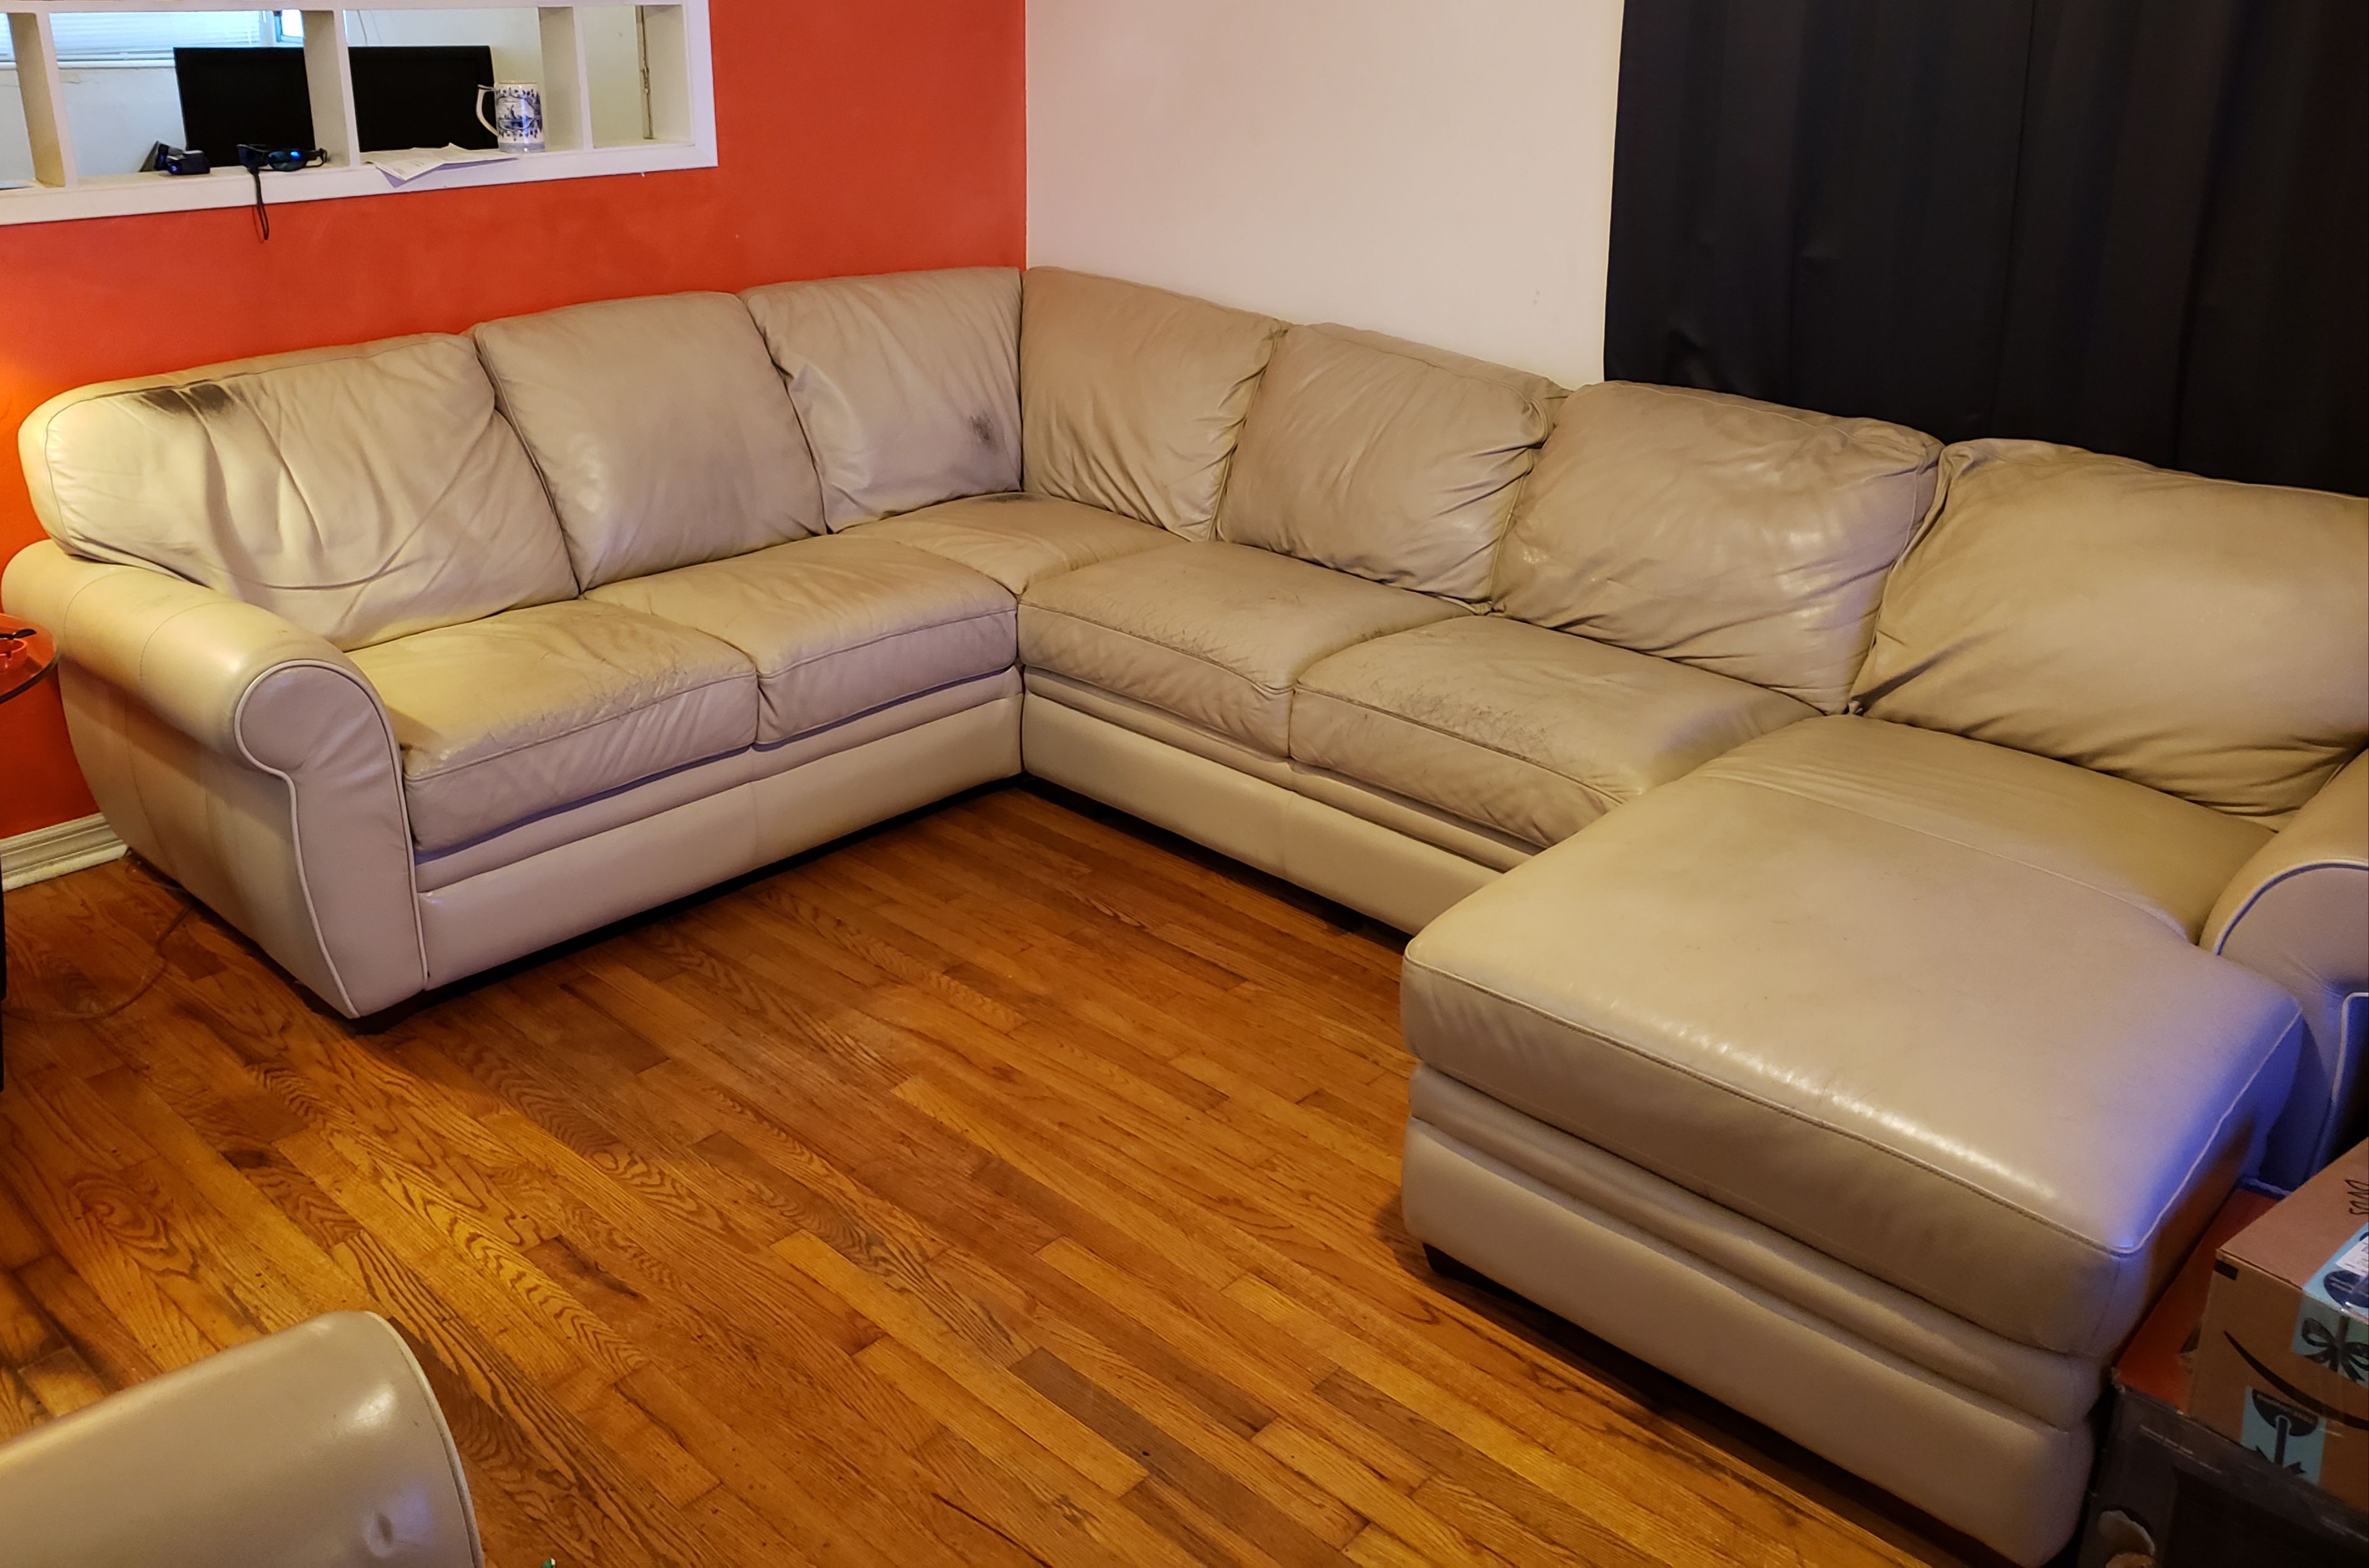 Living Room set for sale tables included